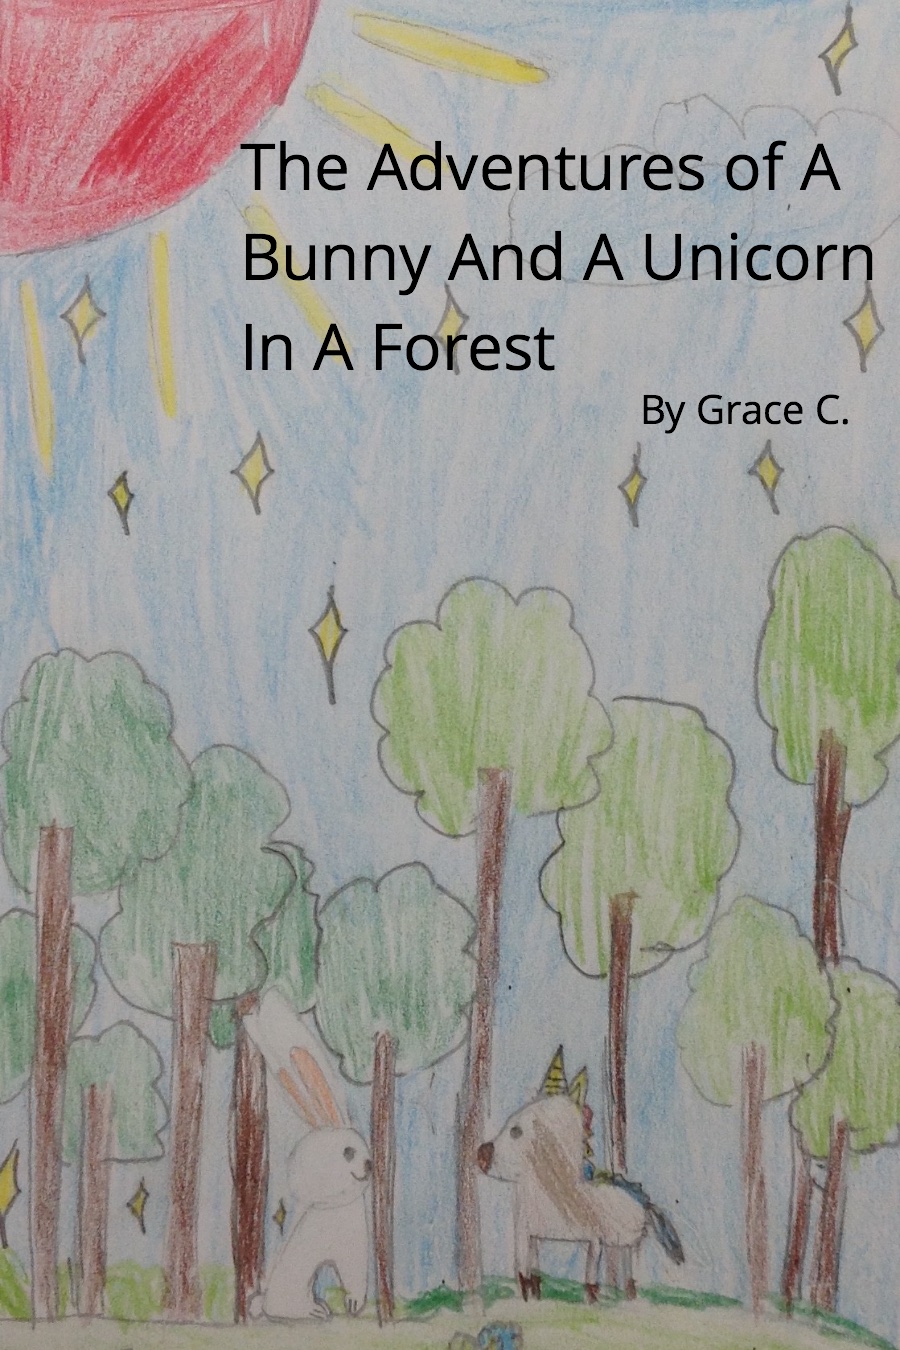 The Adventures of A Bunny And A Unicorn In A Forest by Grace C